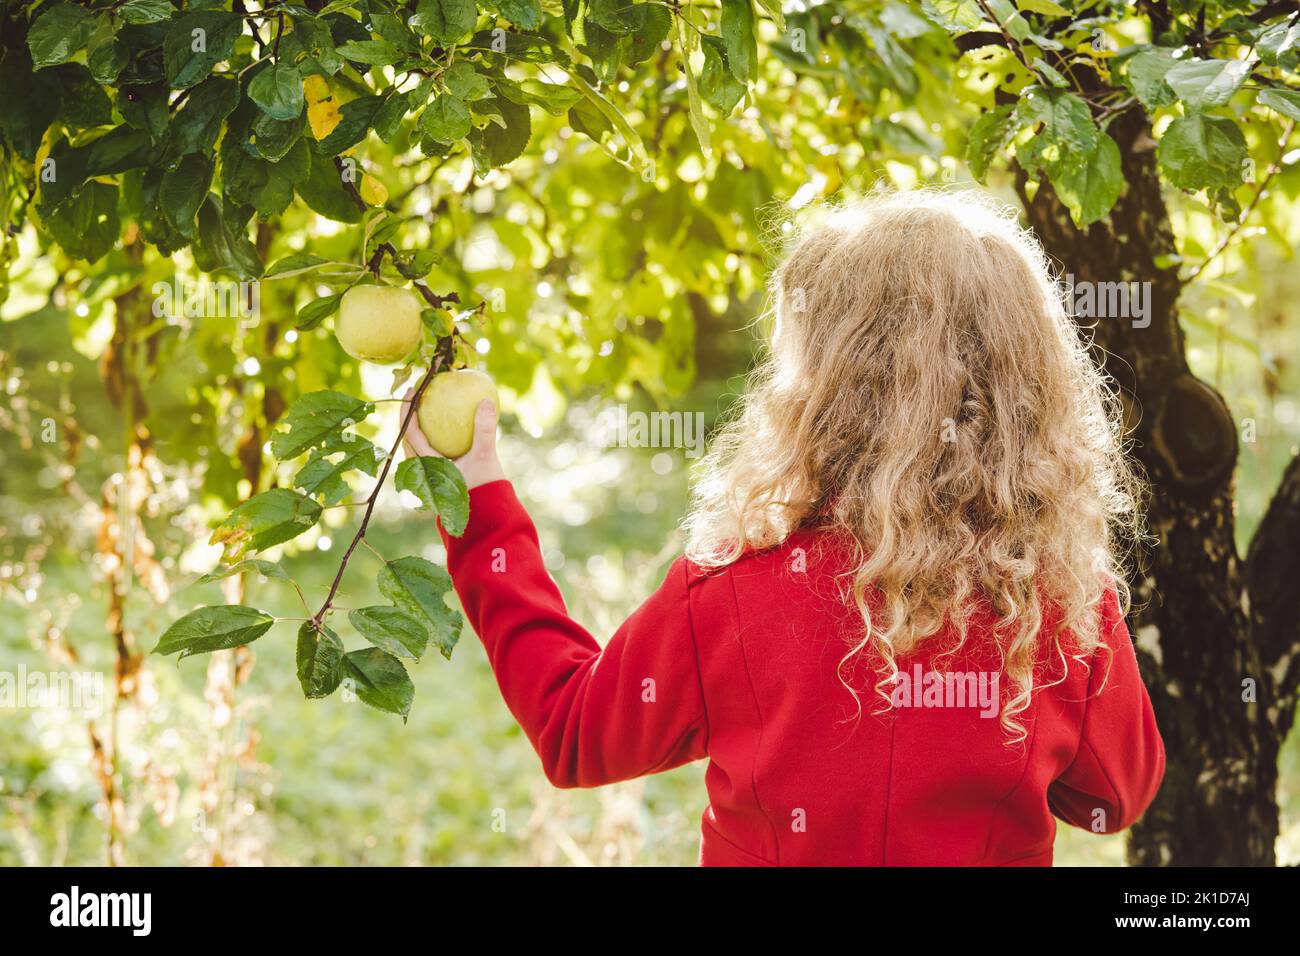 Back side view of 8 year old girl picking green apple from tree on sunny autumn day. Wearing red coat. Fresh organic food concept. Stock Photo